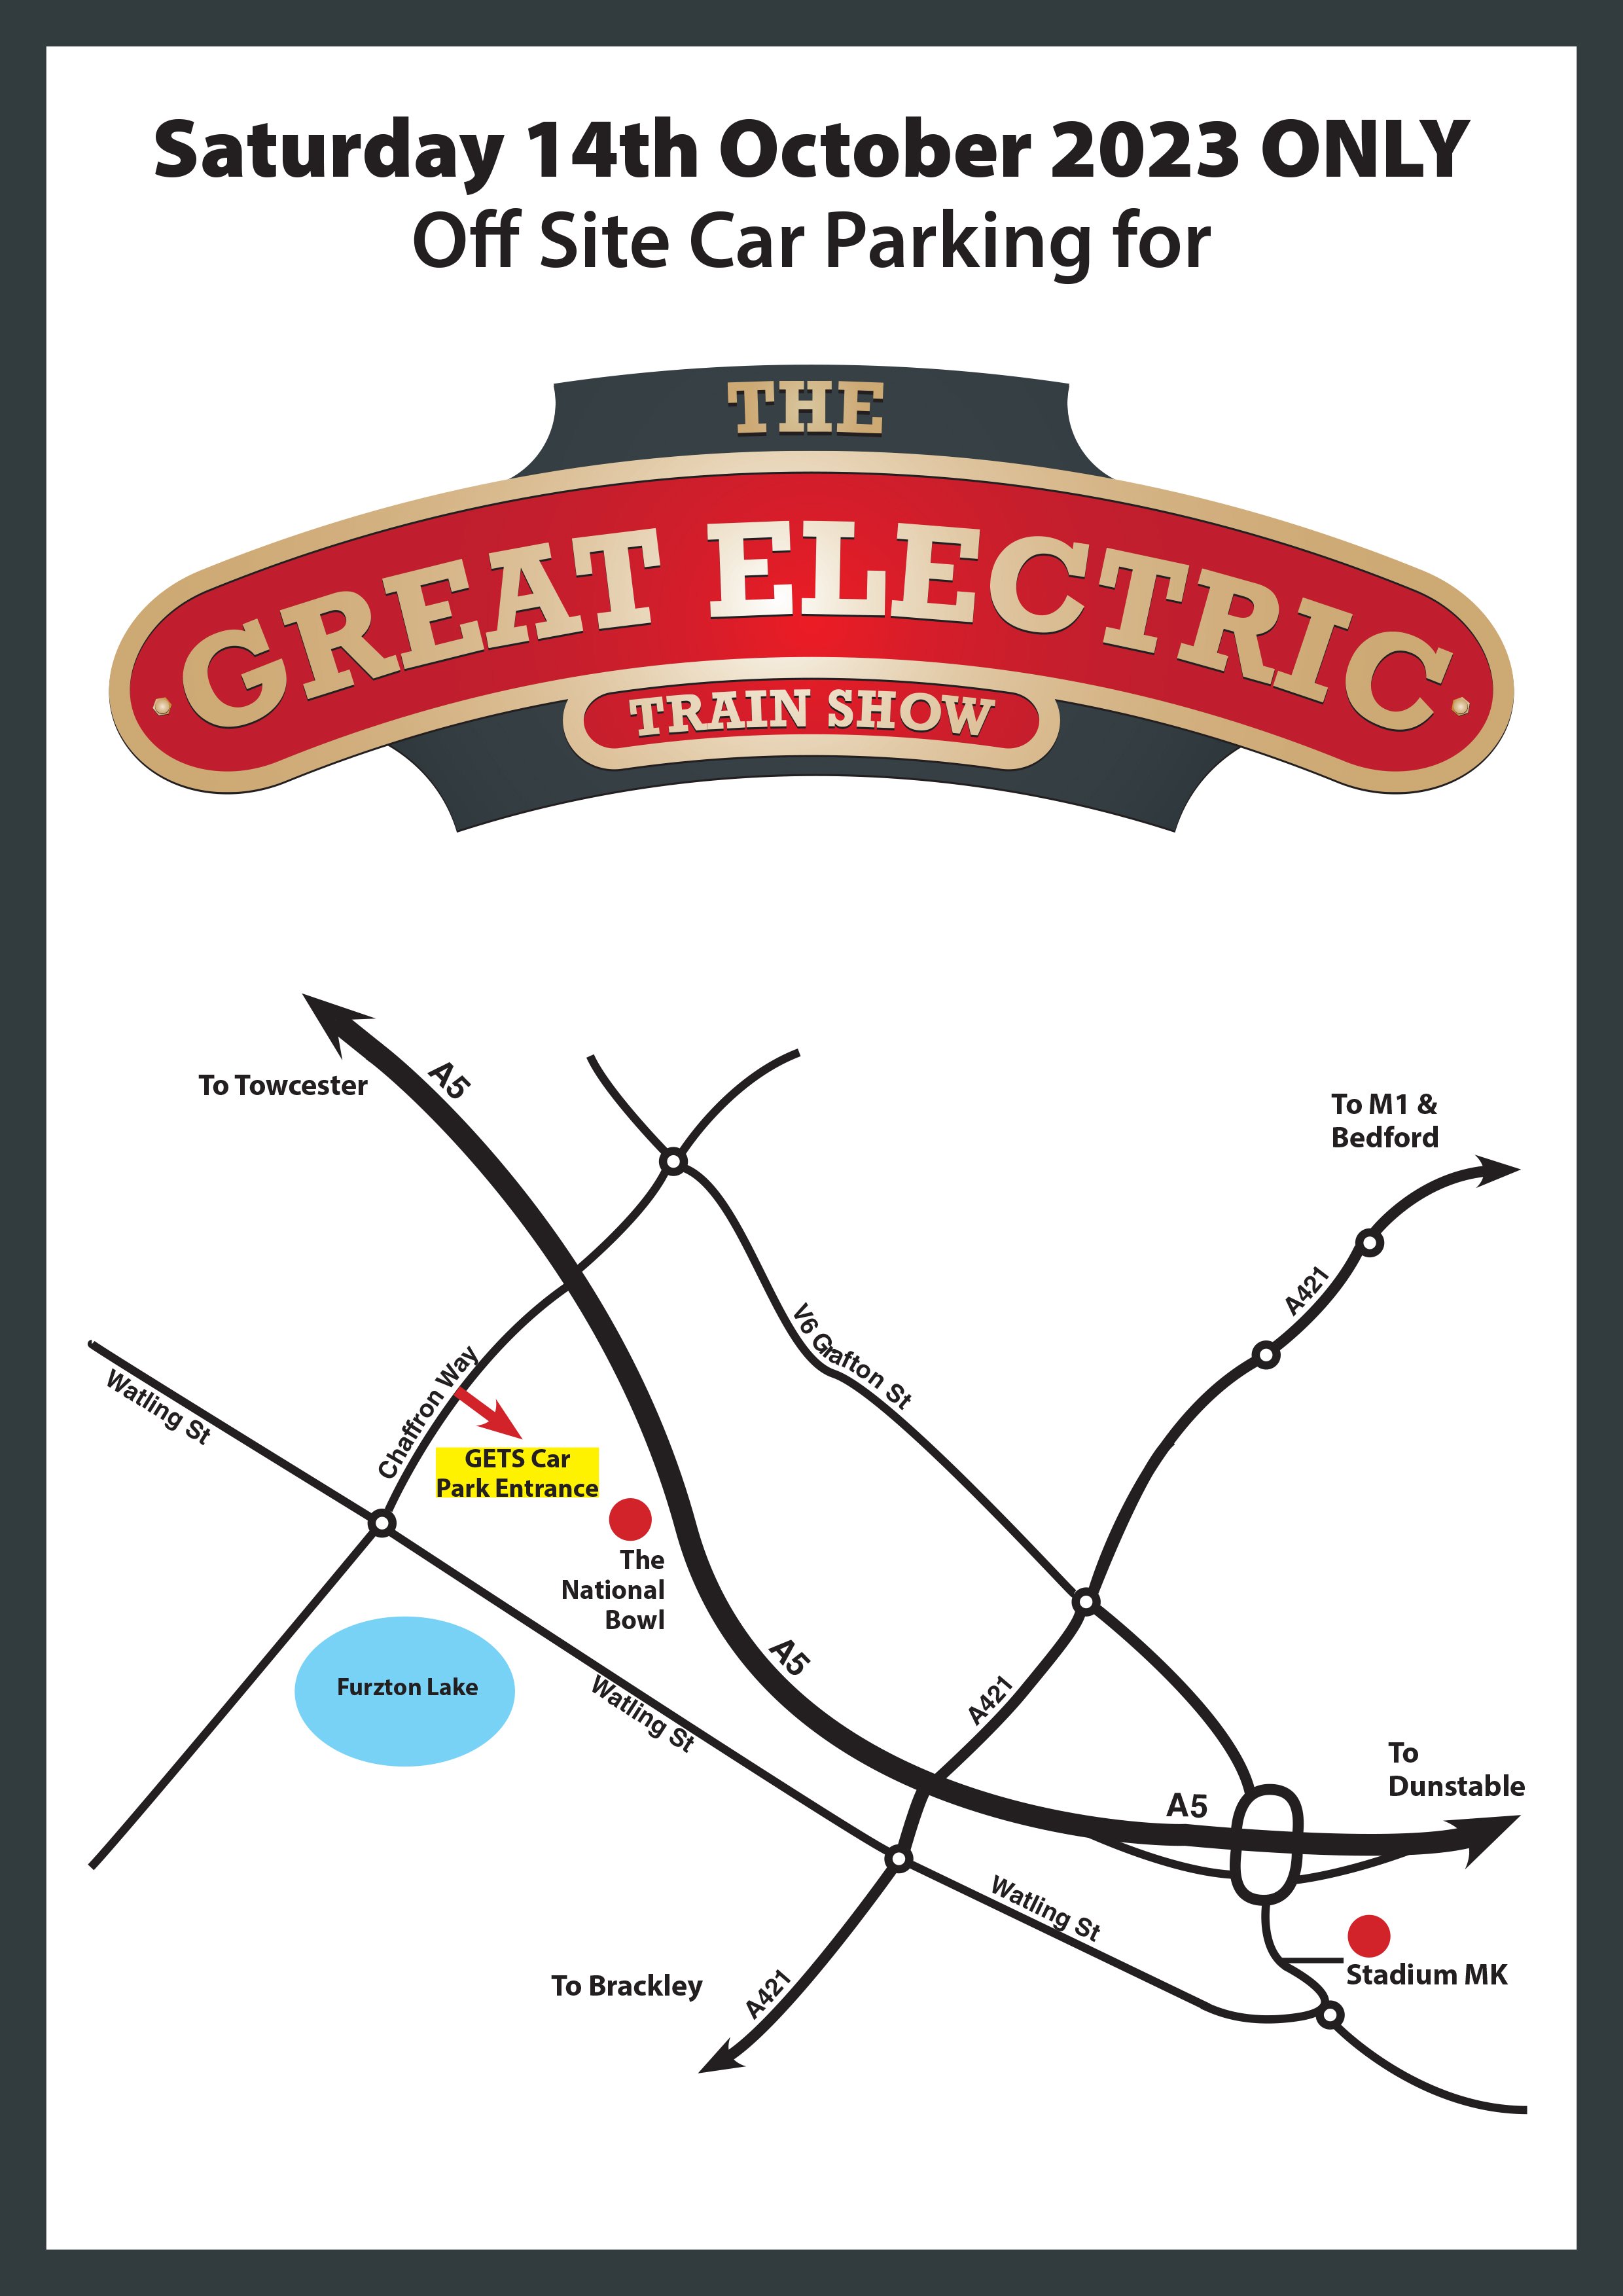 Great Electric Train Show parking location map - Saturday October 14 2023 only.